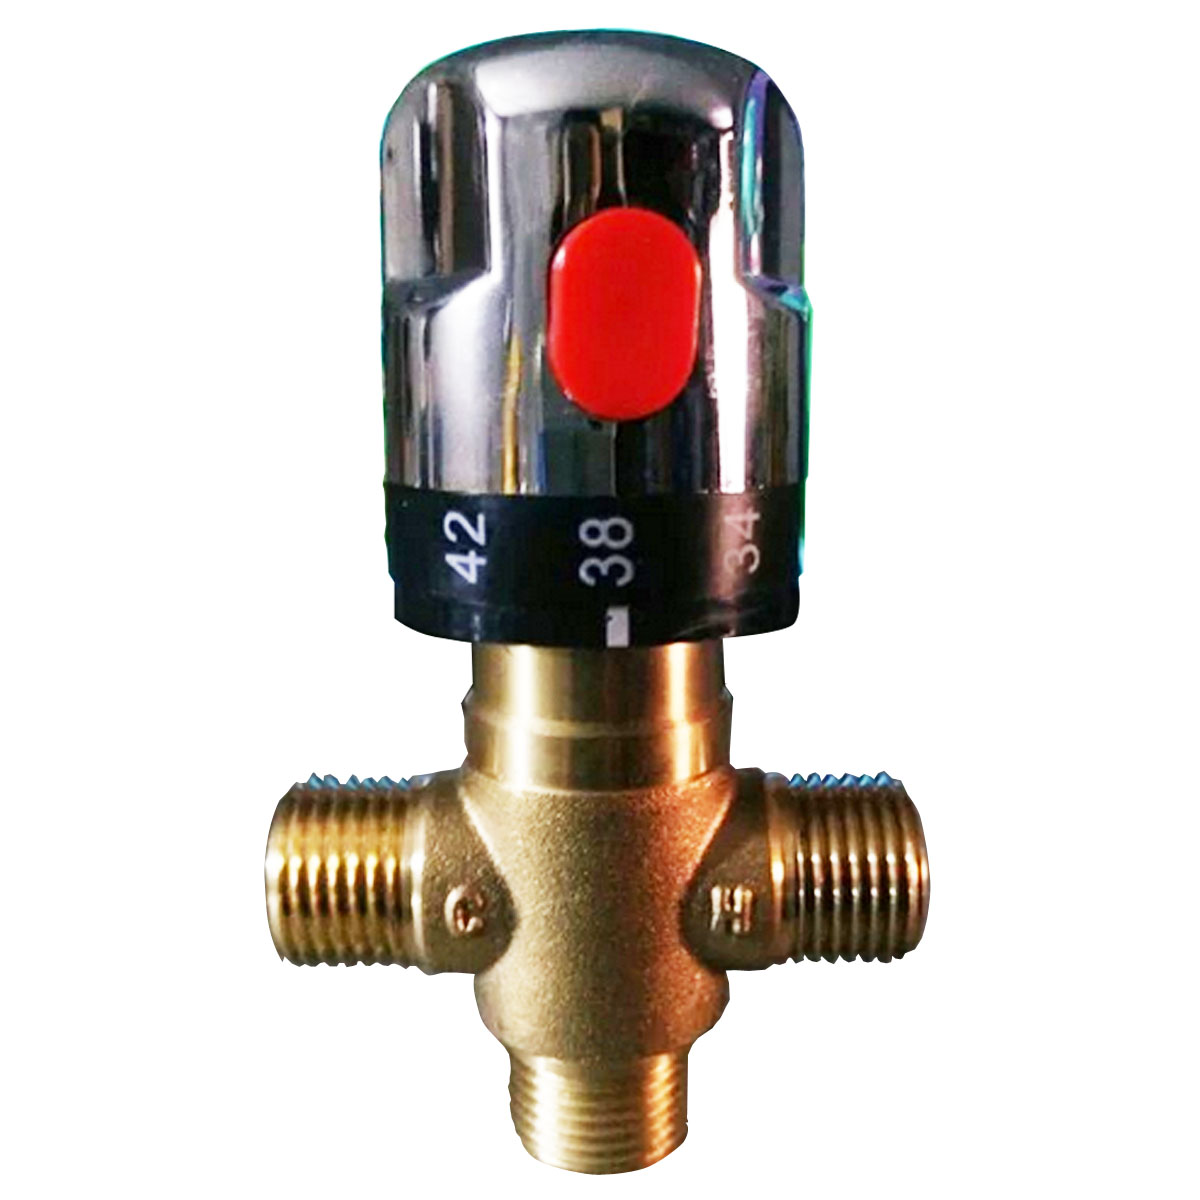 

15mm Hot/Cold Thermostatic Mixing Valve For Bidet Solar Water Heater Shower Mixer